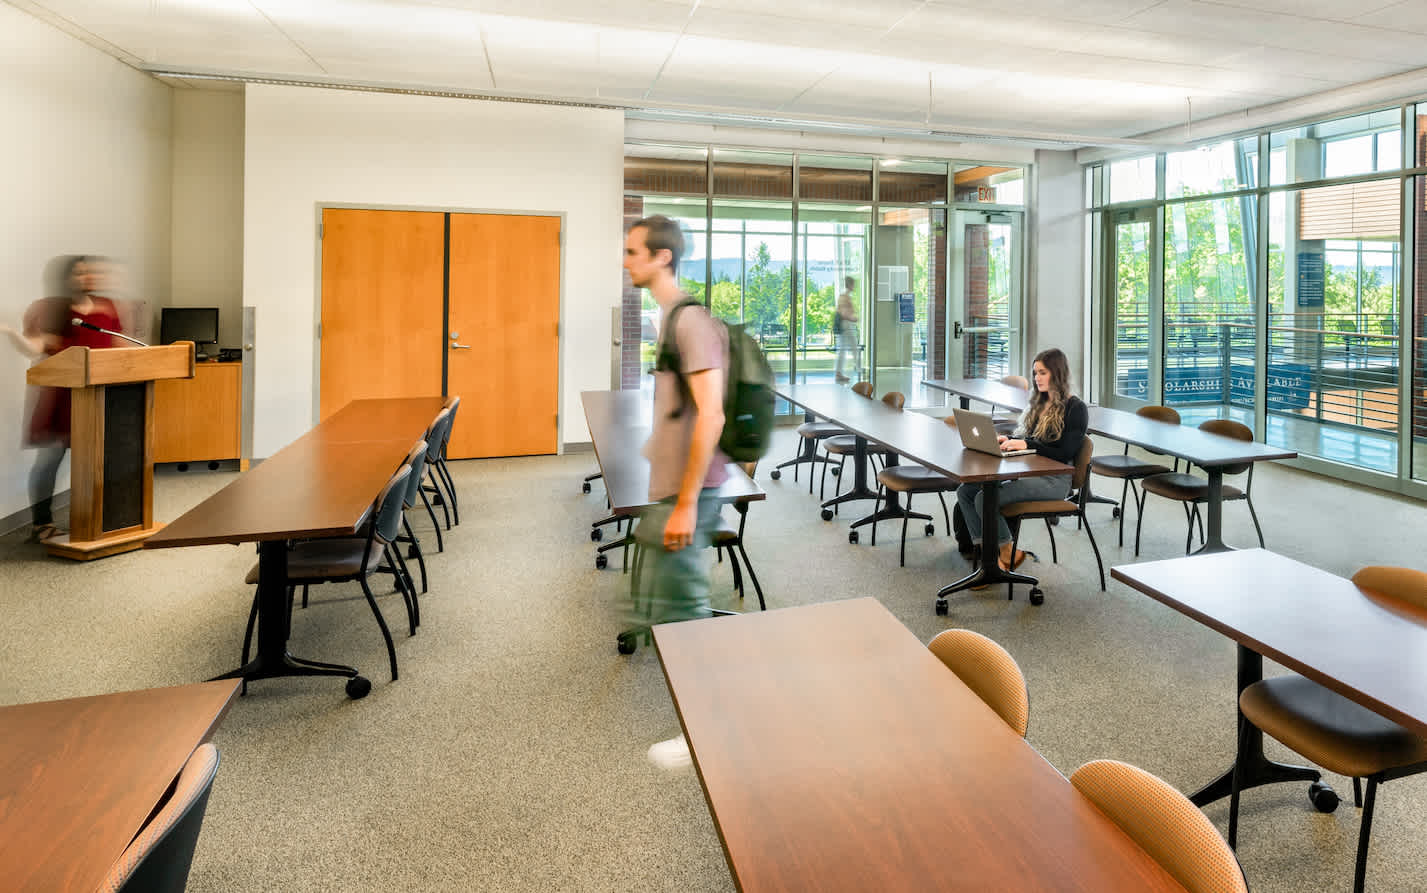 LSW Architects top priority for Clark College - Gaiser Hall was to provide access and maintain functionality of the bookstore, as well as maintaining egress routes from classrooms and offices.